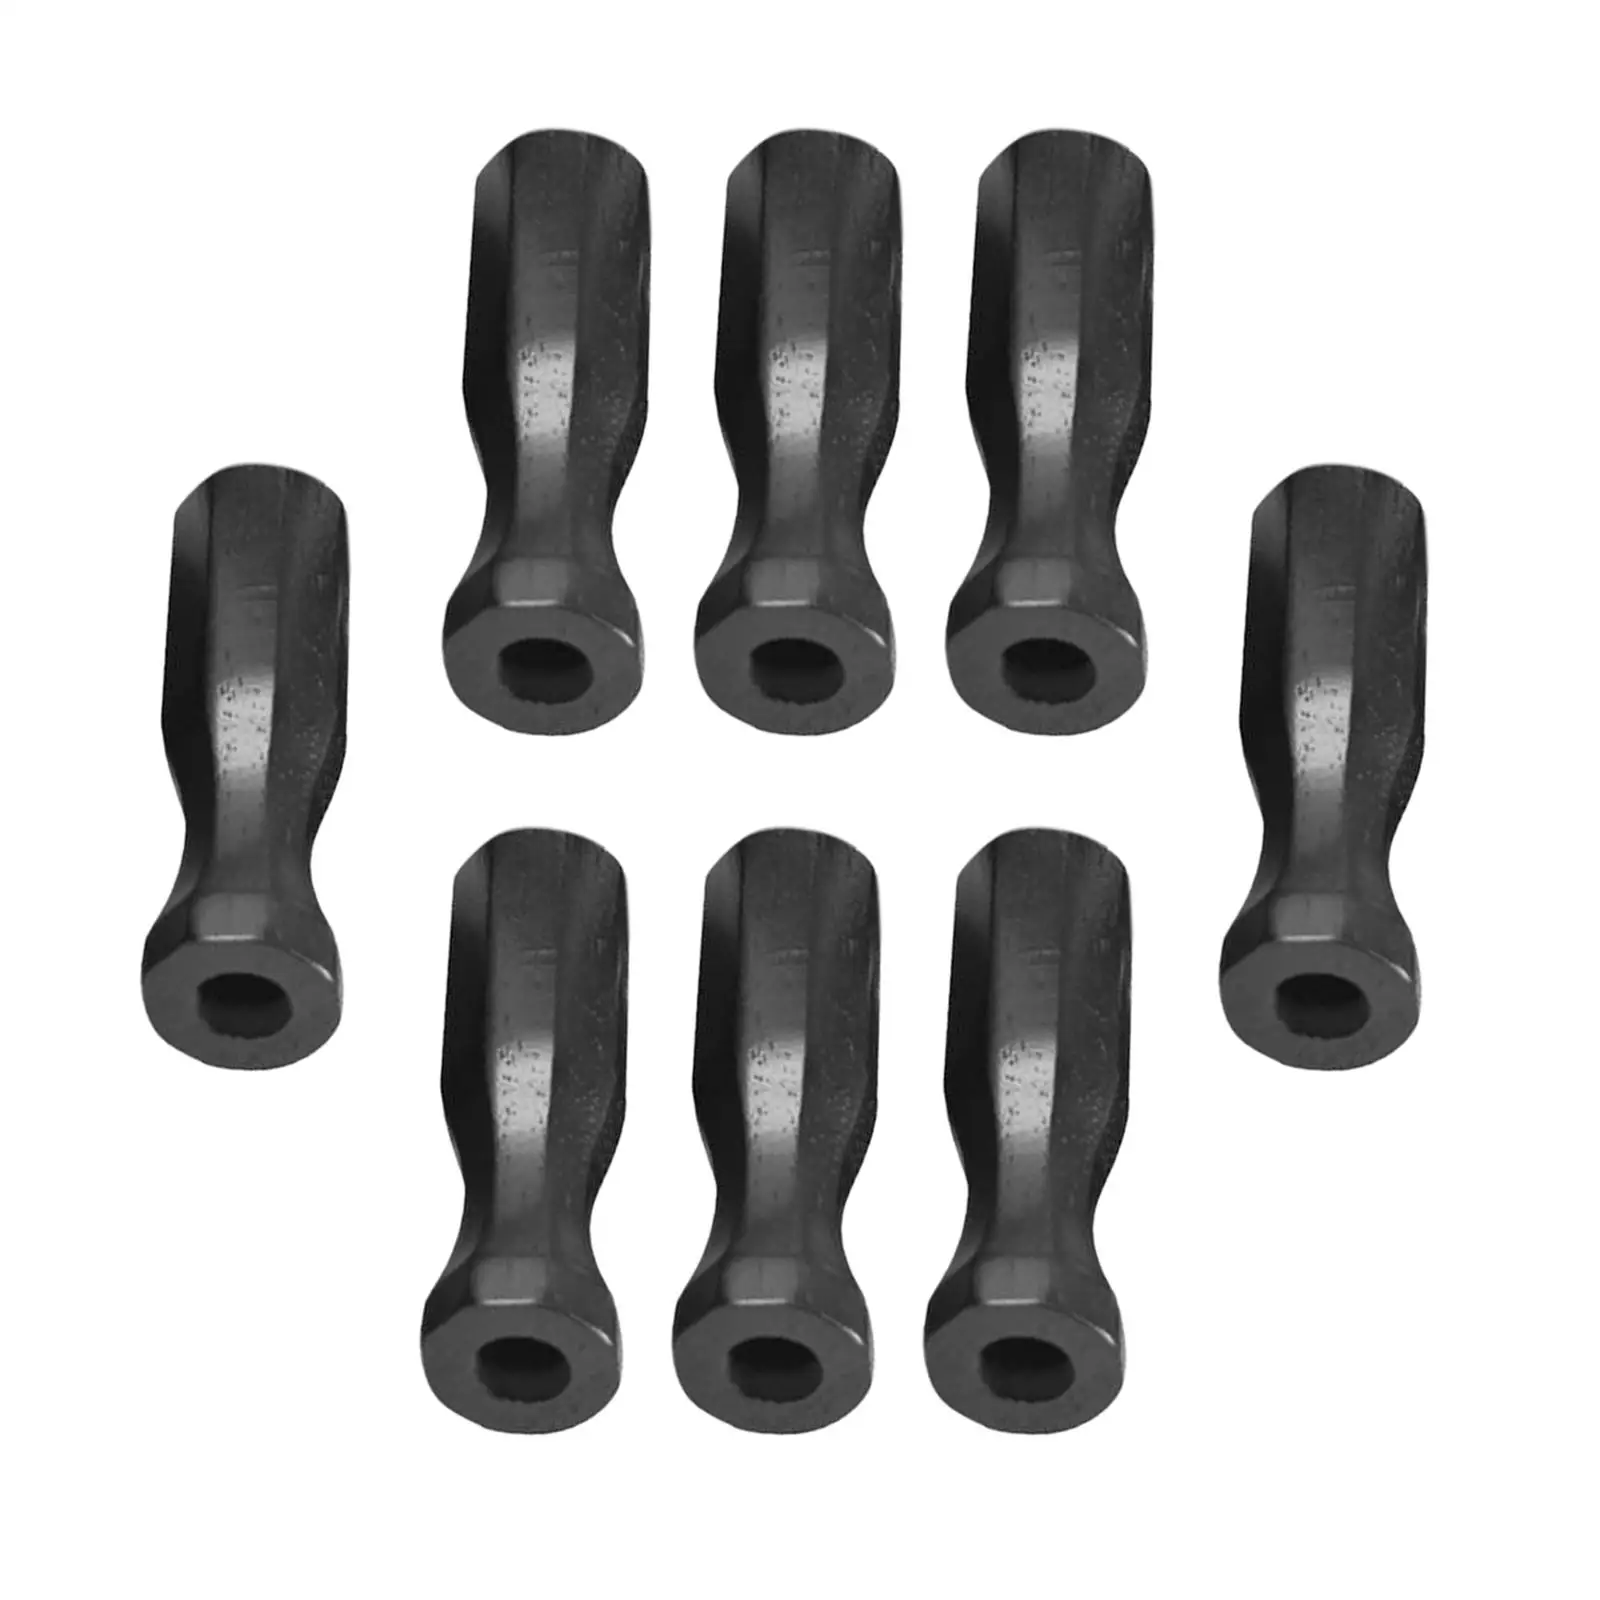 8Pcs Soccer Table Handles Durable Lightweight Foosball Handle Grip for Game Child Indoor Soccer Machine Standard Foosball Tables